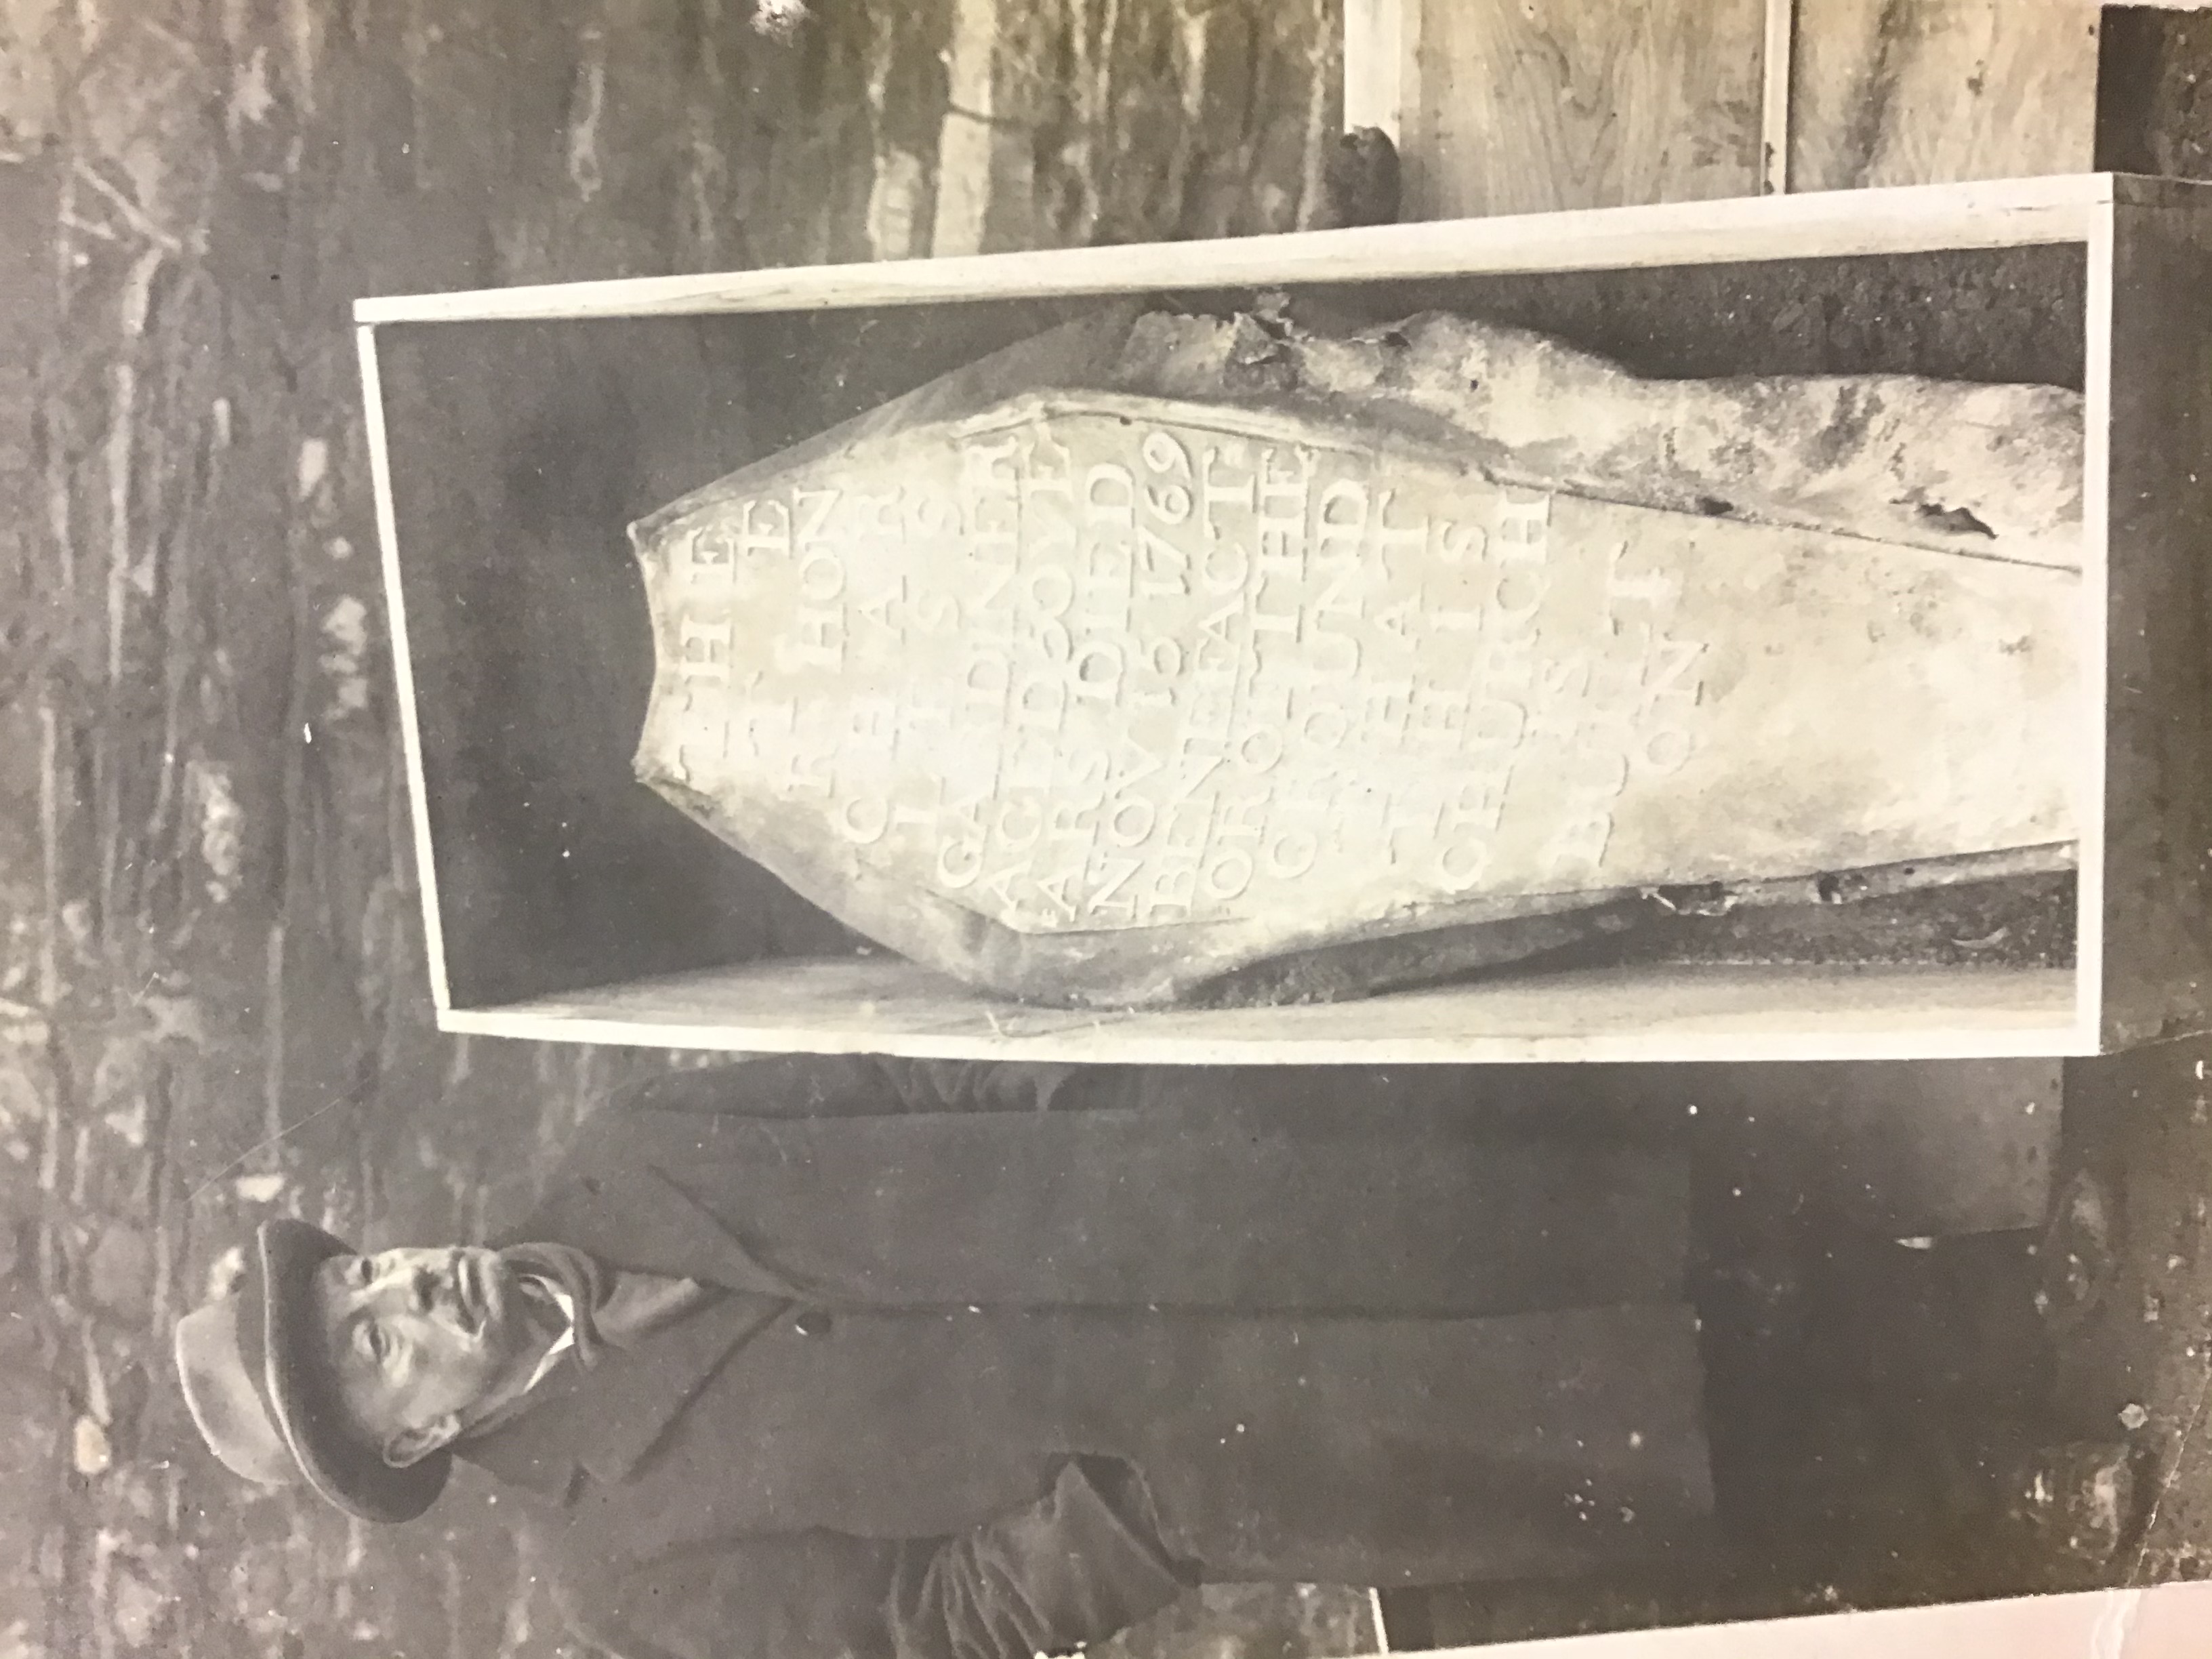 Photograph taken during the re-interring of the remains from the old graveyard. This photograph shows the tombstone of Rt Hon Charles Gardiner, who donated the land where the old church was built. This image shows Mr E. W. Purdon, Rector's Churchwarden, who began his association with the parish of St Thomas some 50 years before the building of the new St Thomas's church. The task of carrying out the removal of the contents of the vaults and churchyard to St Jerome was given to Mr Purdon, under the direction of the then rector, Revd D. H. Hall. RCB Library P.80.27.6